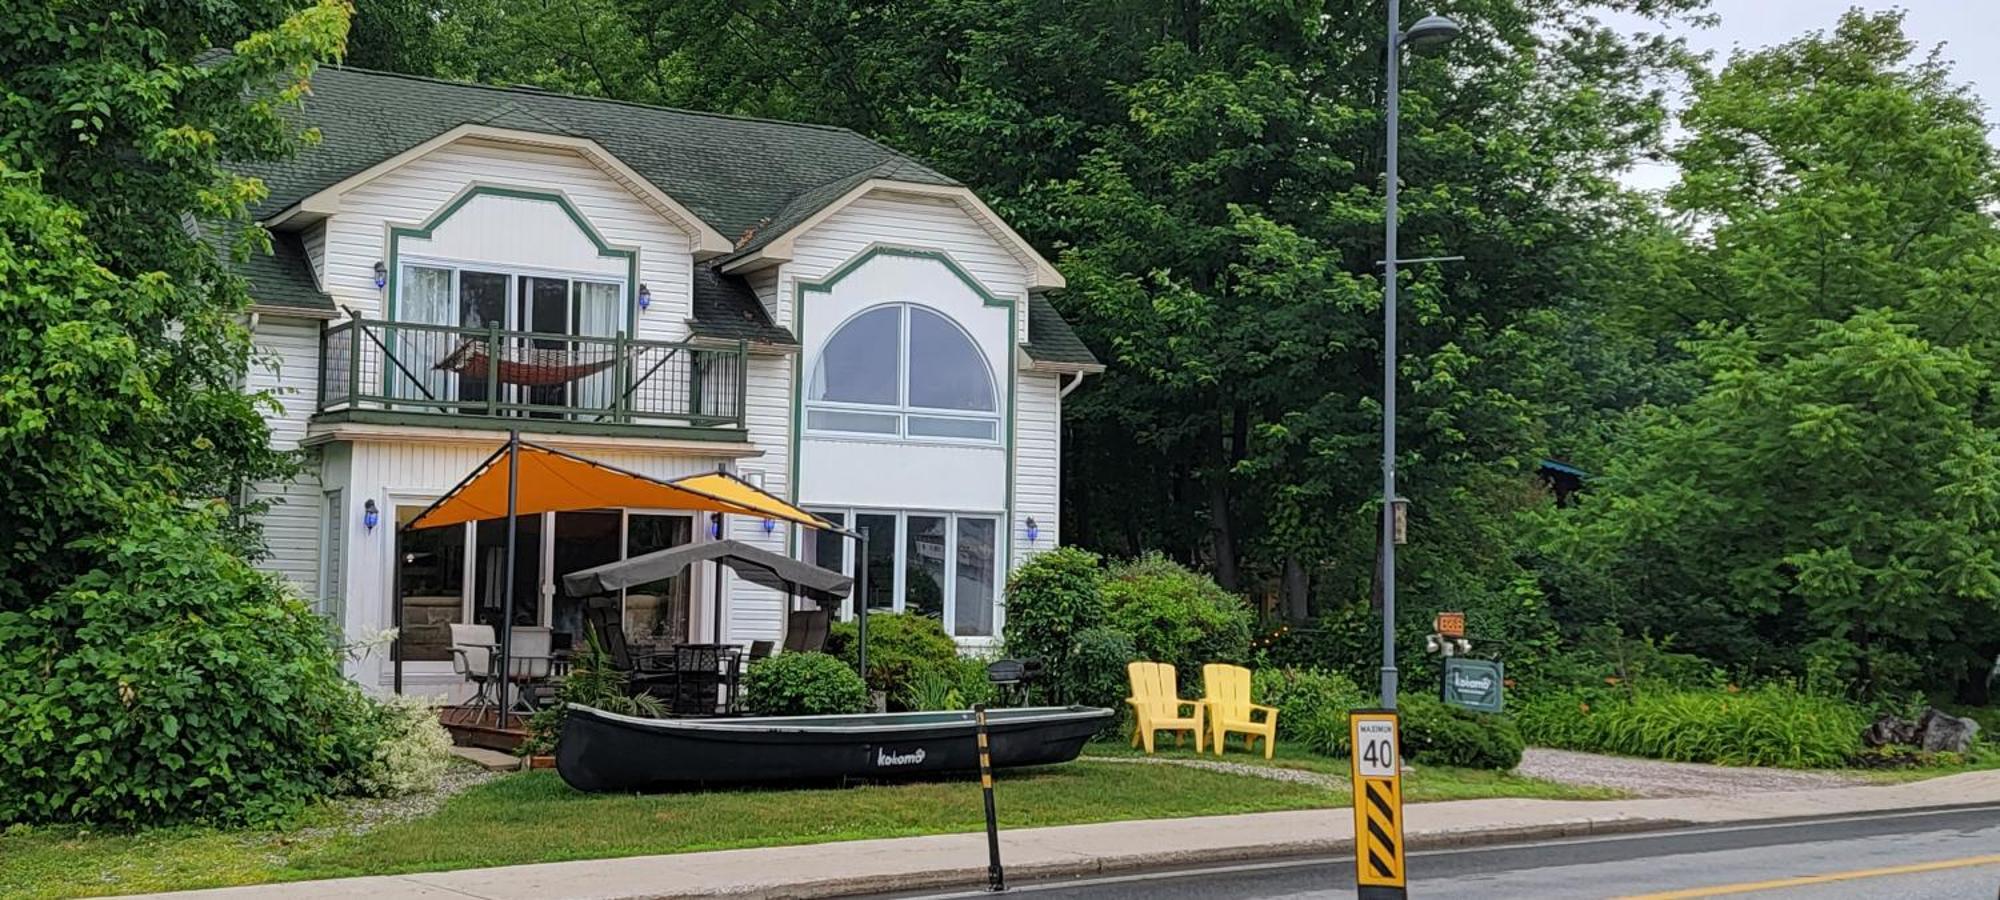 Kokomo Inn Bed And Breakfast Ottawa-Gatineau'S Only Tropical Riverfront B&B On The National Capital Cycling Pathway Route Verte #1 - For Adults Only - Chambre D'Hotes Tropical Aux Berges Des Outaouais Bnb #17542O Luaran gambar